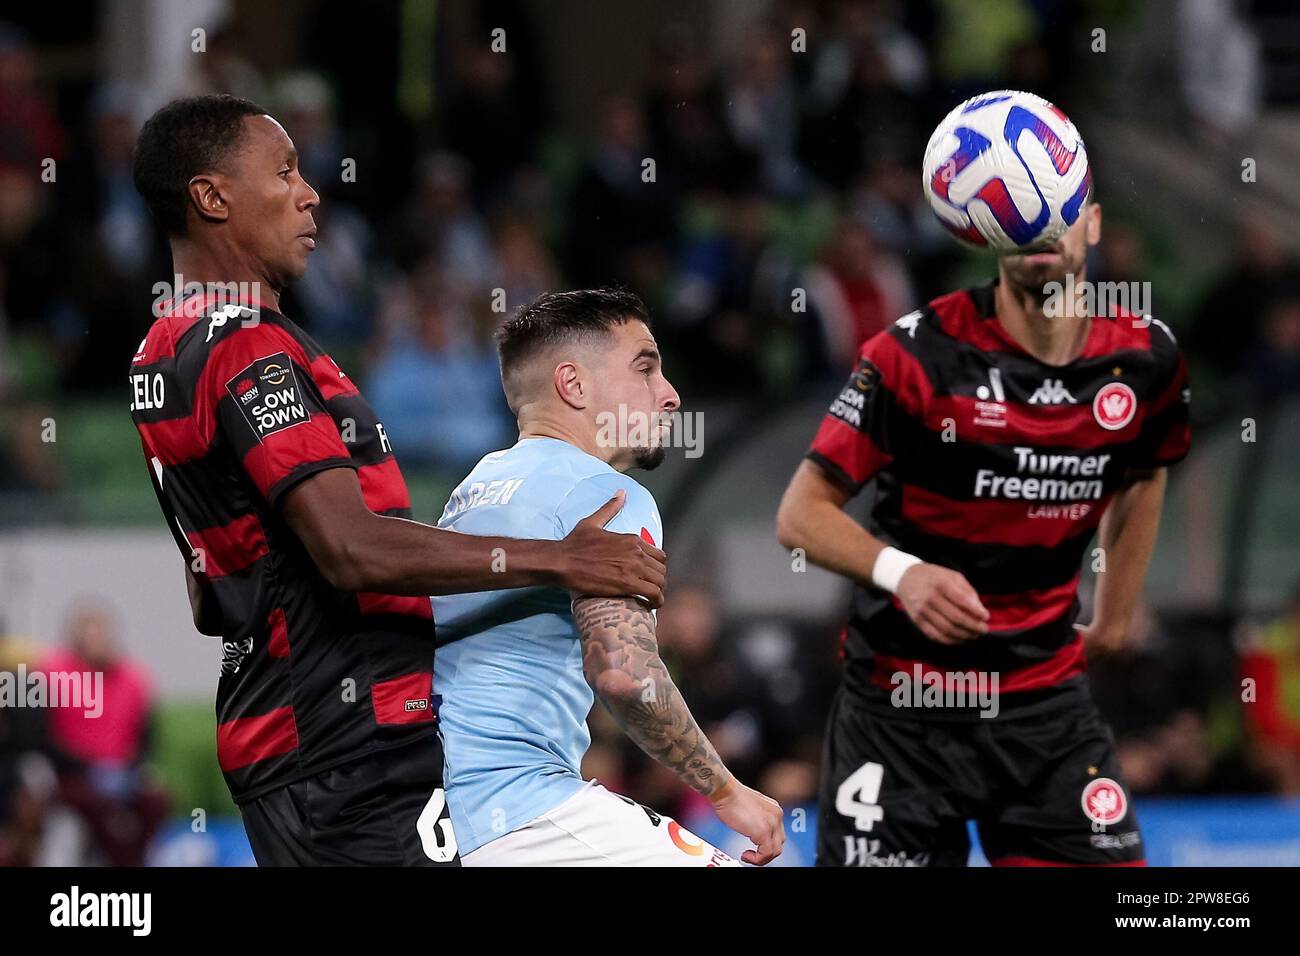 Melbourne, Australia, 28 April, 2023. Marcelo of Western Sydney Wanderers in action during the A-League Men's football match between Melbourne City and Western Sydney Wanderers at AAMI Park on April 28, 2023 in Melbourne, Australia. Credit: Dave Hewison/Alamy Live News Stock Photo